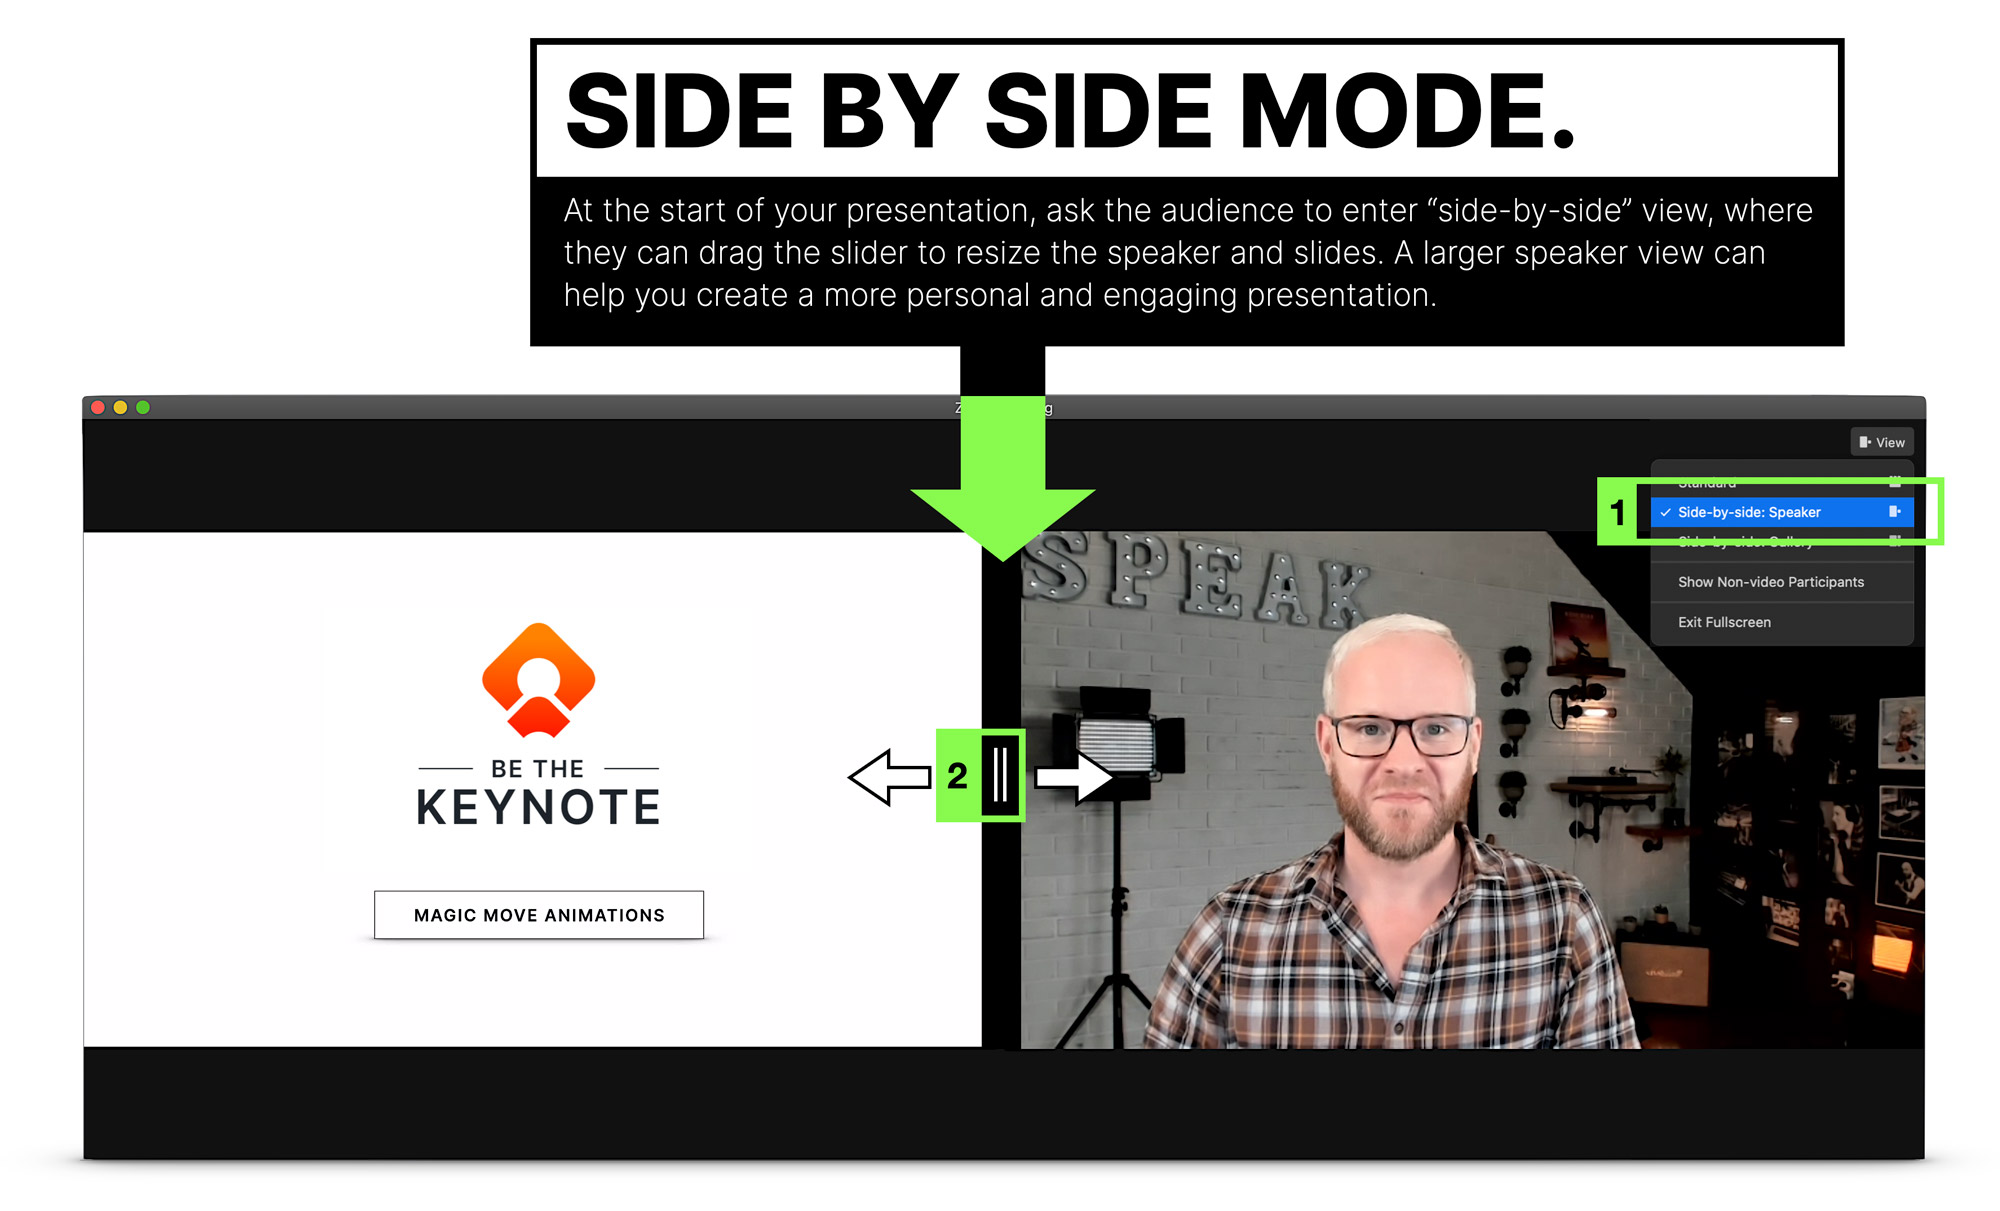 Zoom side-by-side mode allows attendees to control the size of you and the slides.